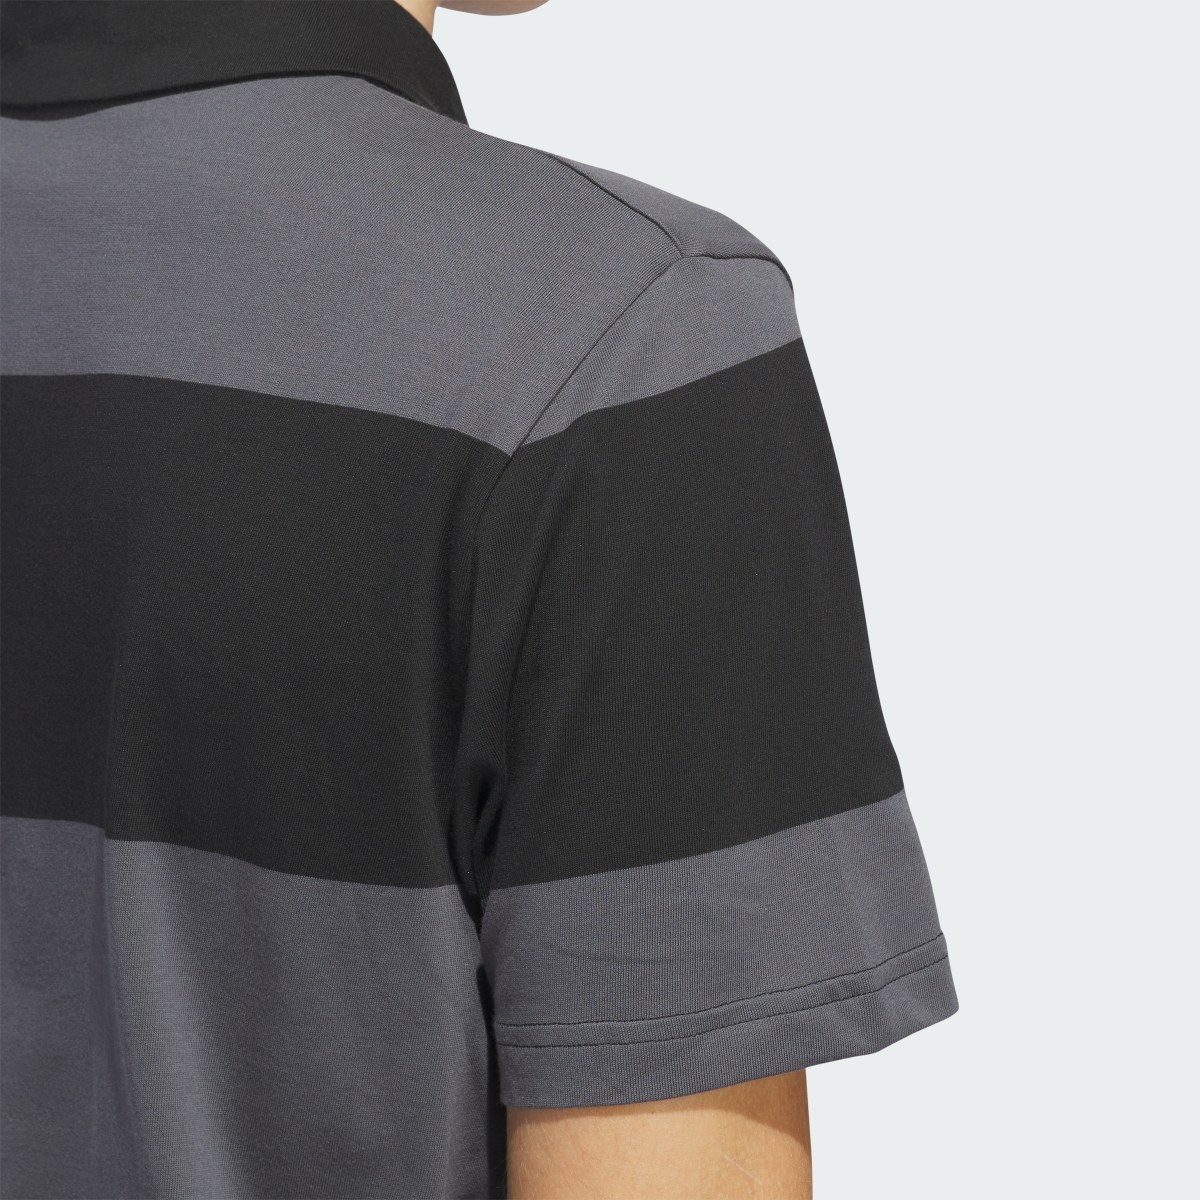 Adidas Colorblock Rugby Stripe Polo Shirt. 7